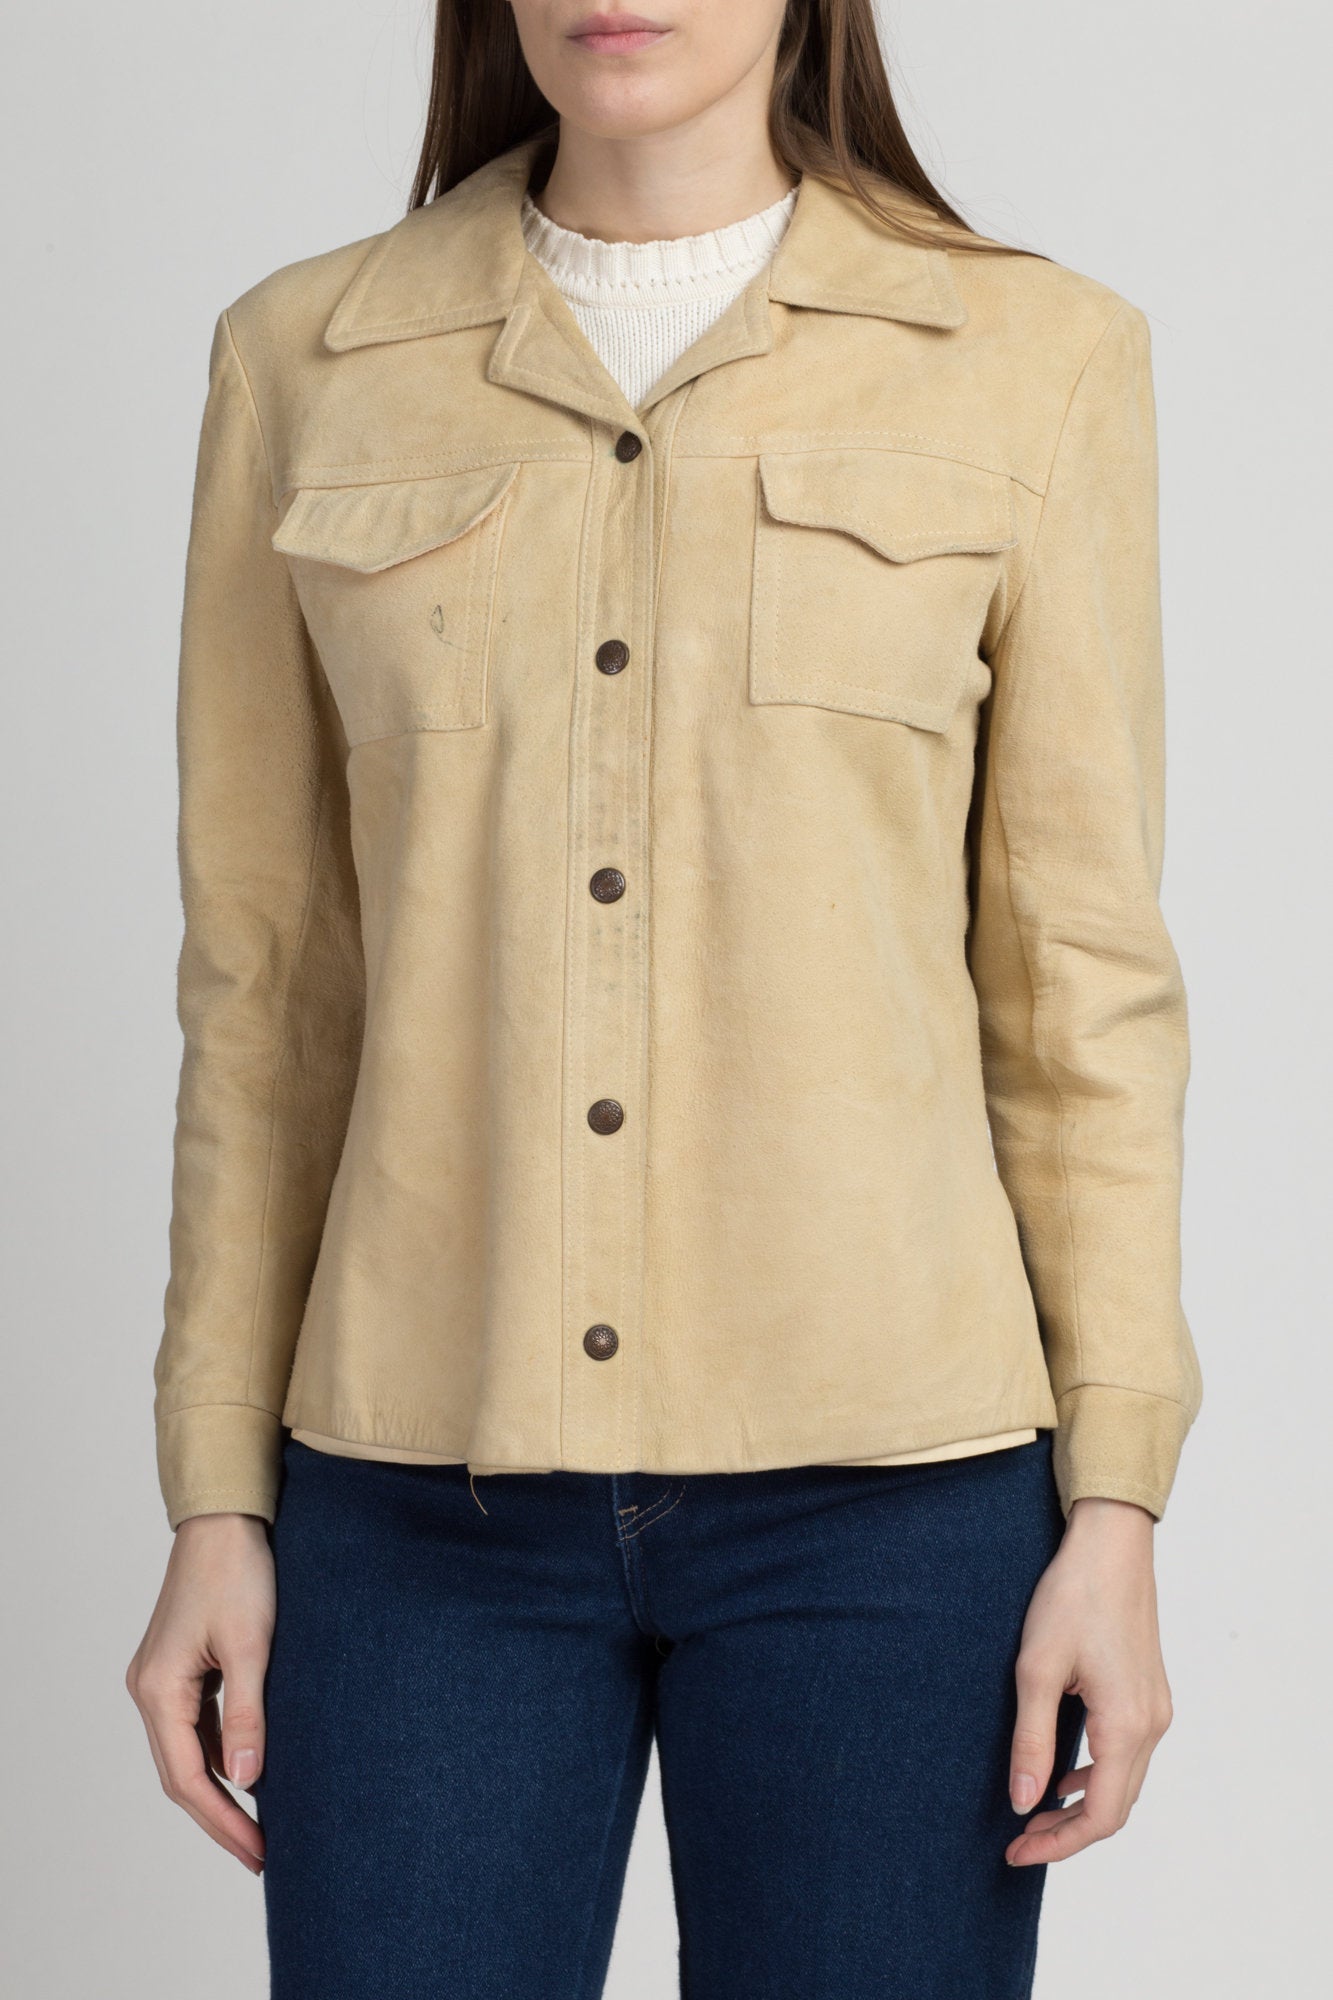 Vintage 60s Tan Suede Jacket - Small | 1960s Golden State Leather Snap Button Blazer